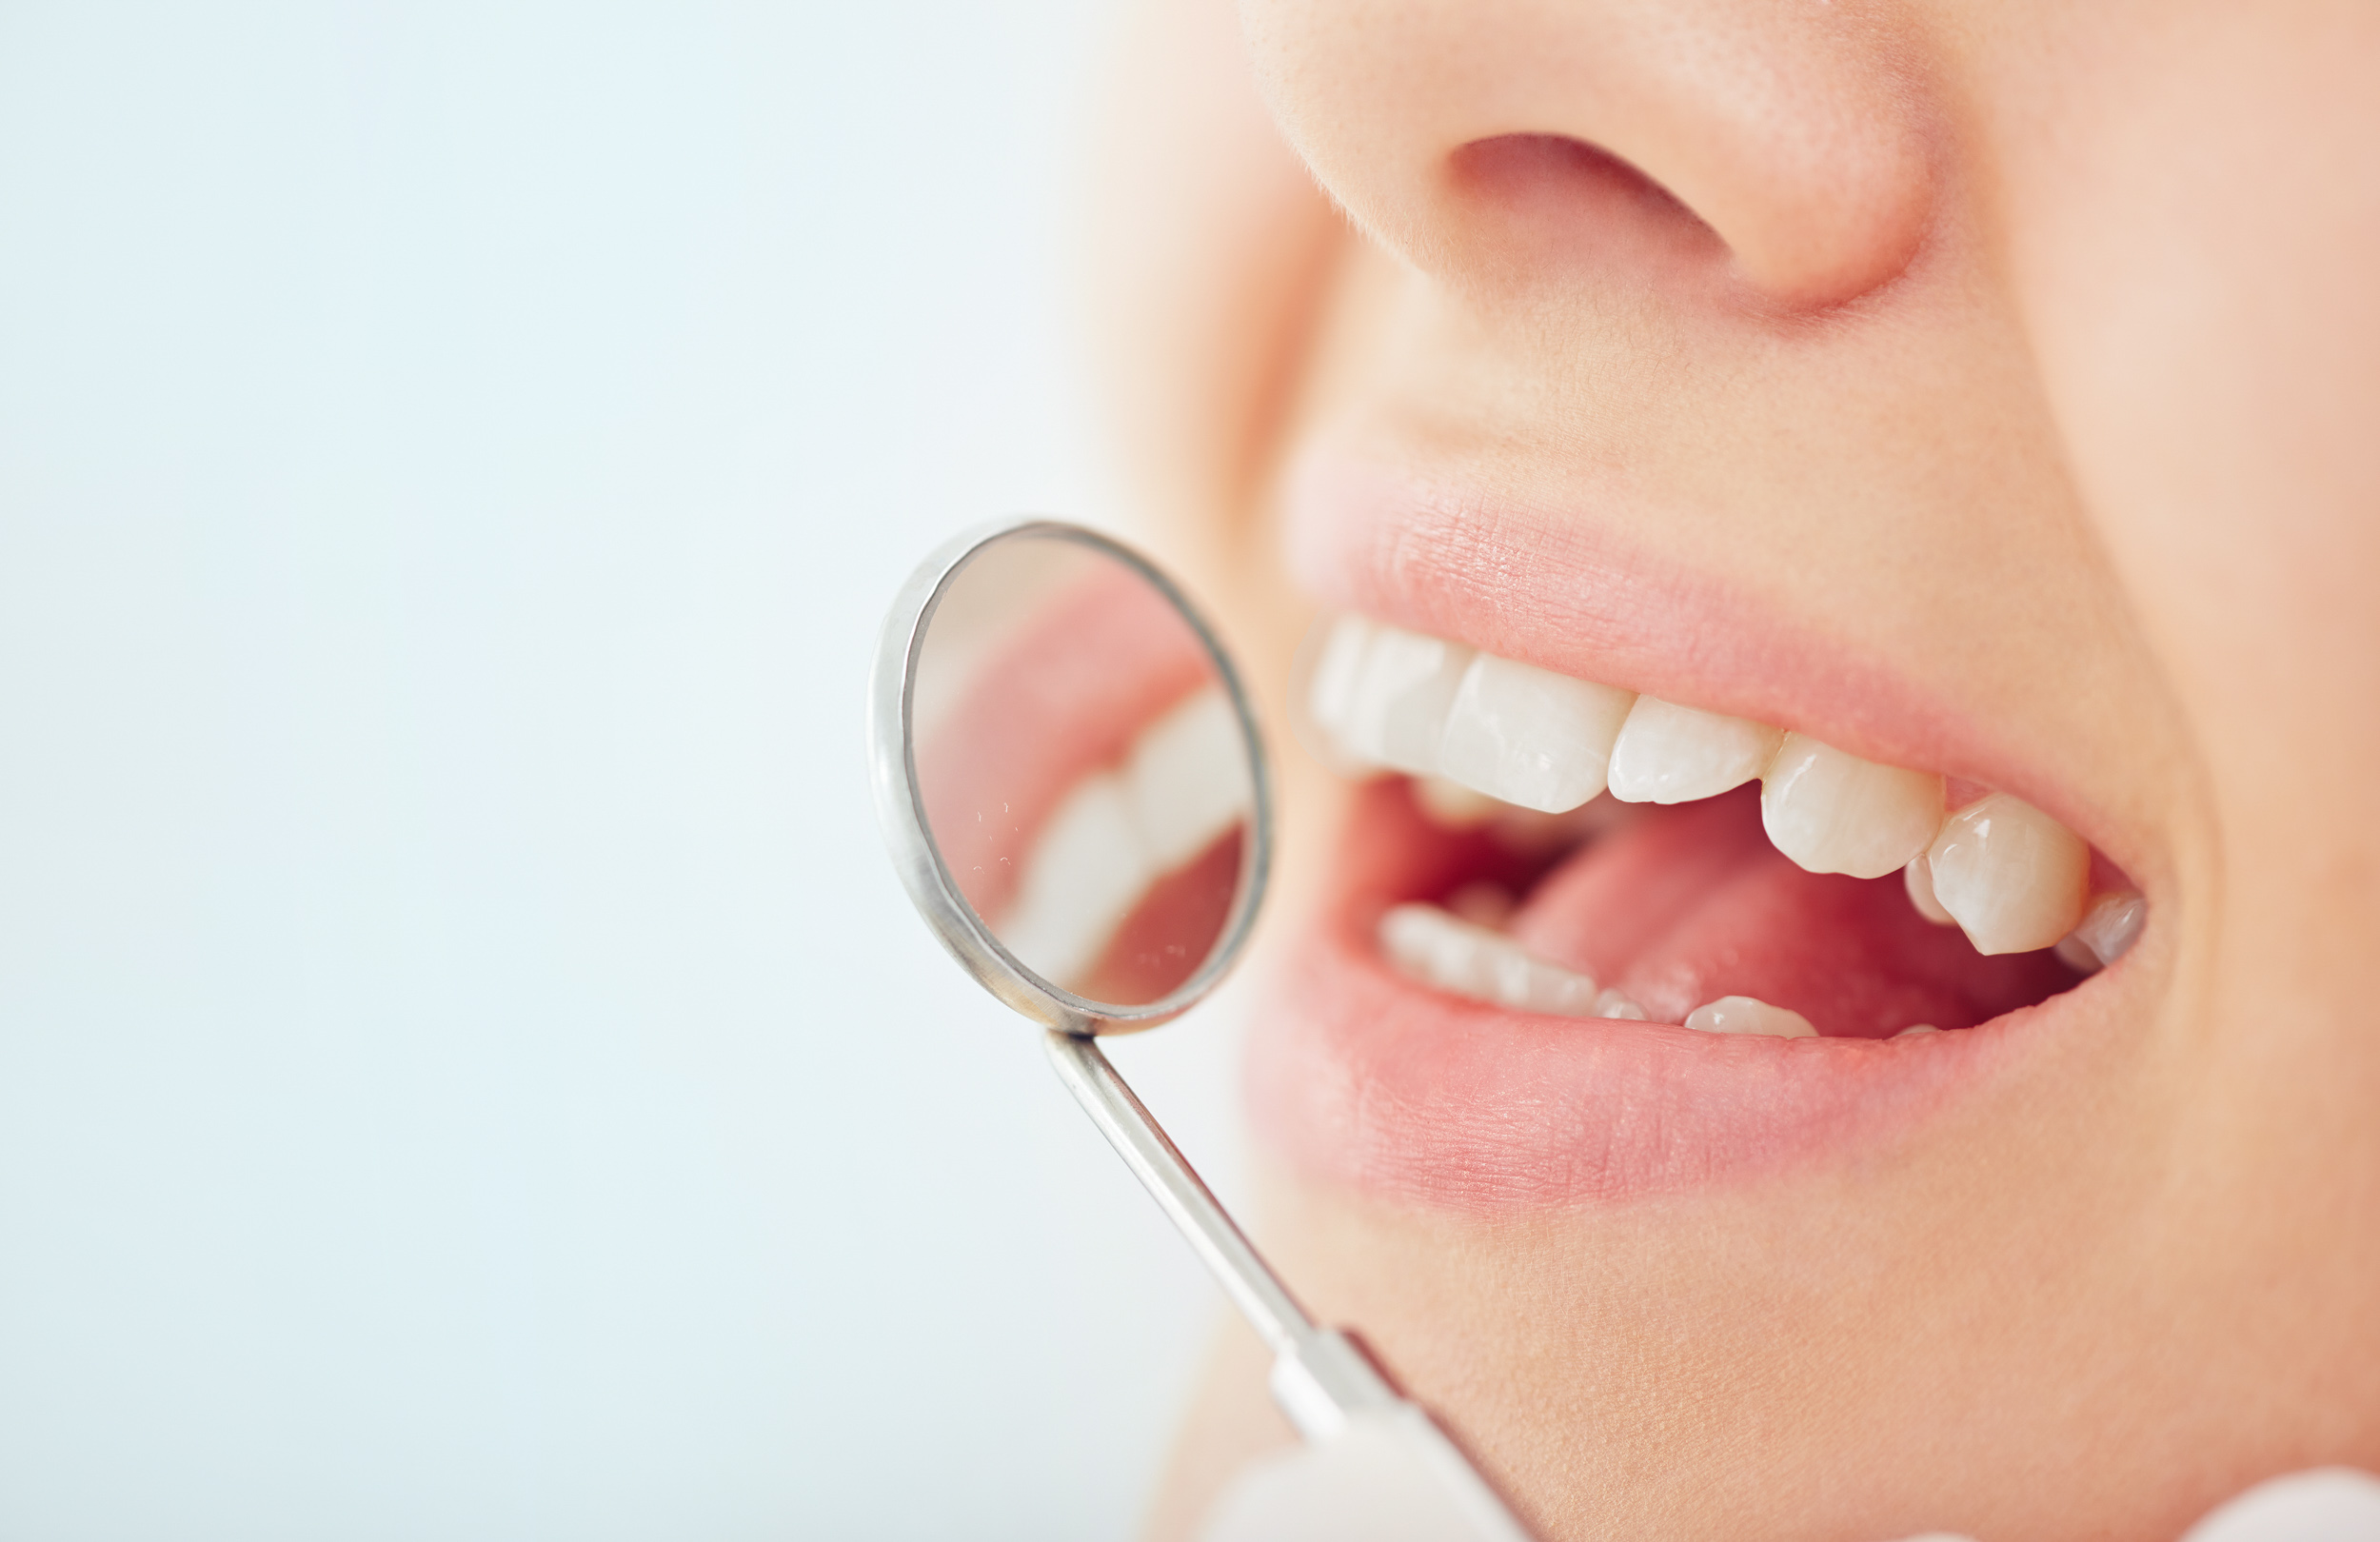 adult dental services can help relieve TMJ pain